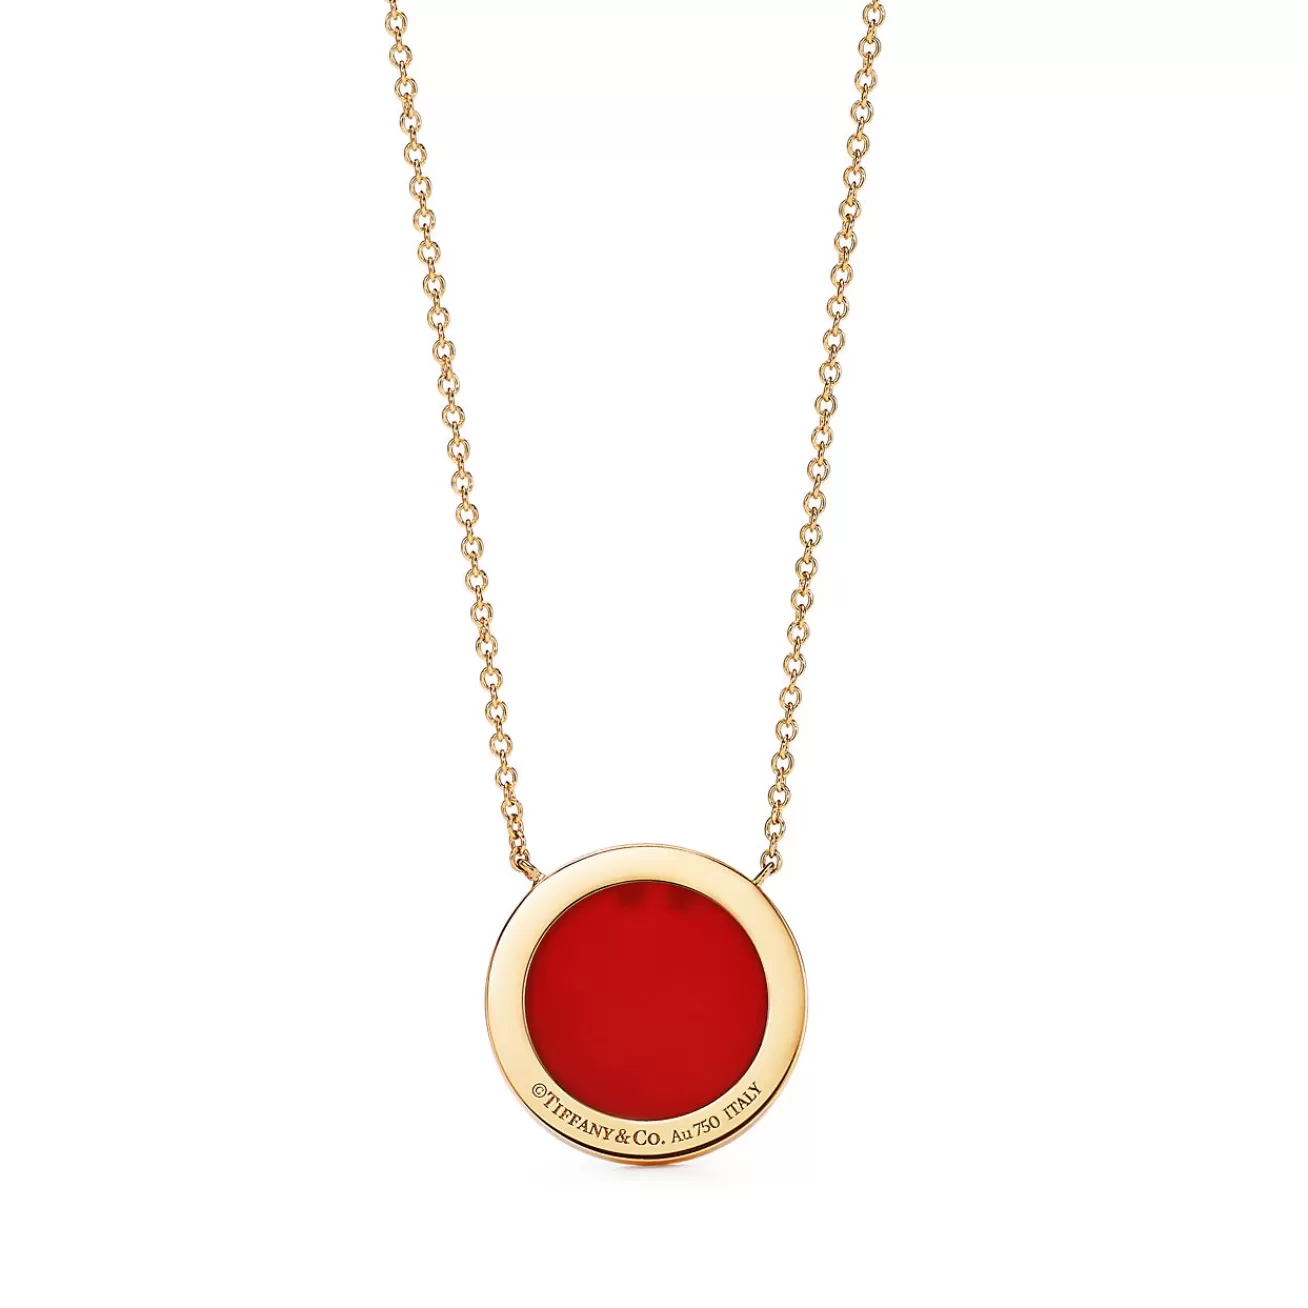 Tiffany & Co. Tiffany T diamond and carnelian circle pendant in 18k gold. | ^ Necklaces & Pendants | Gold Jewelry